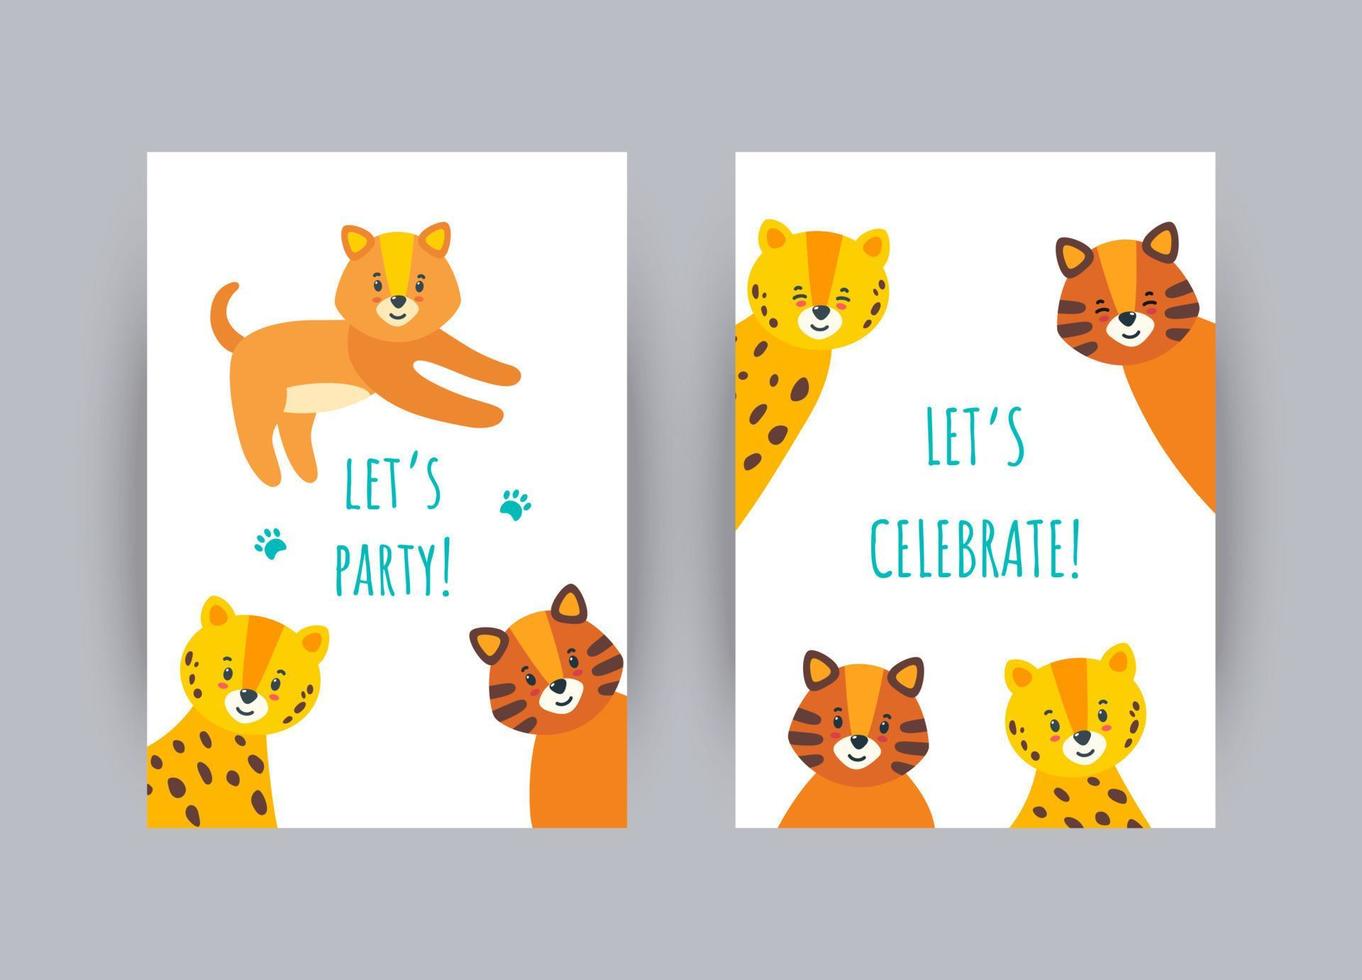 Greeting cards with cute animals. Vector illustration in flat style